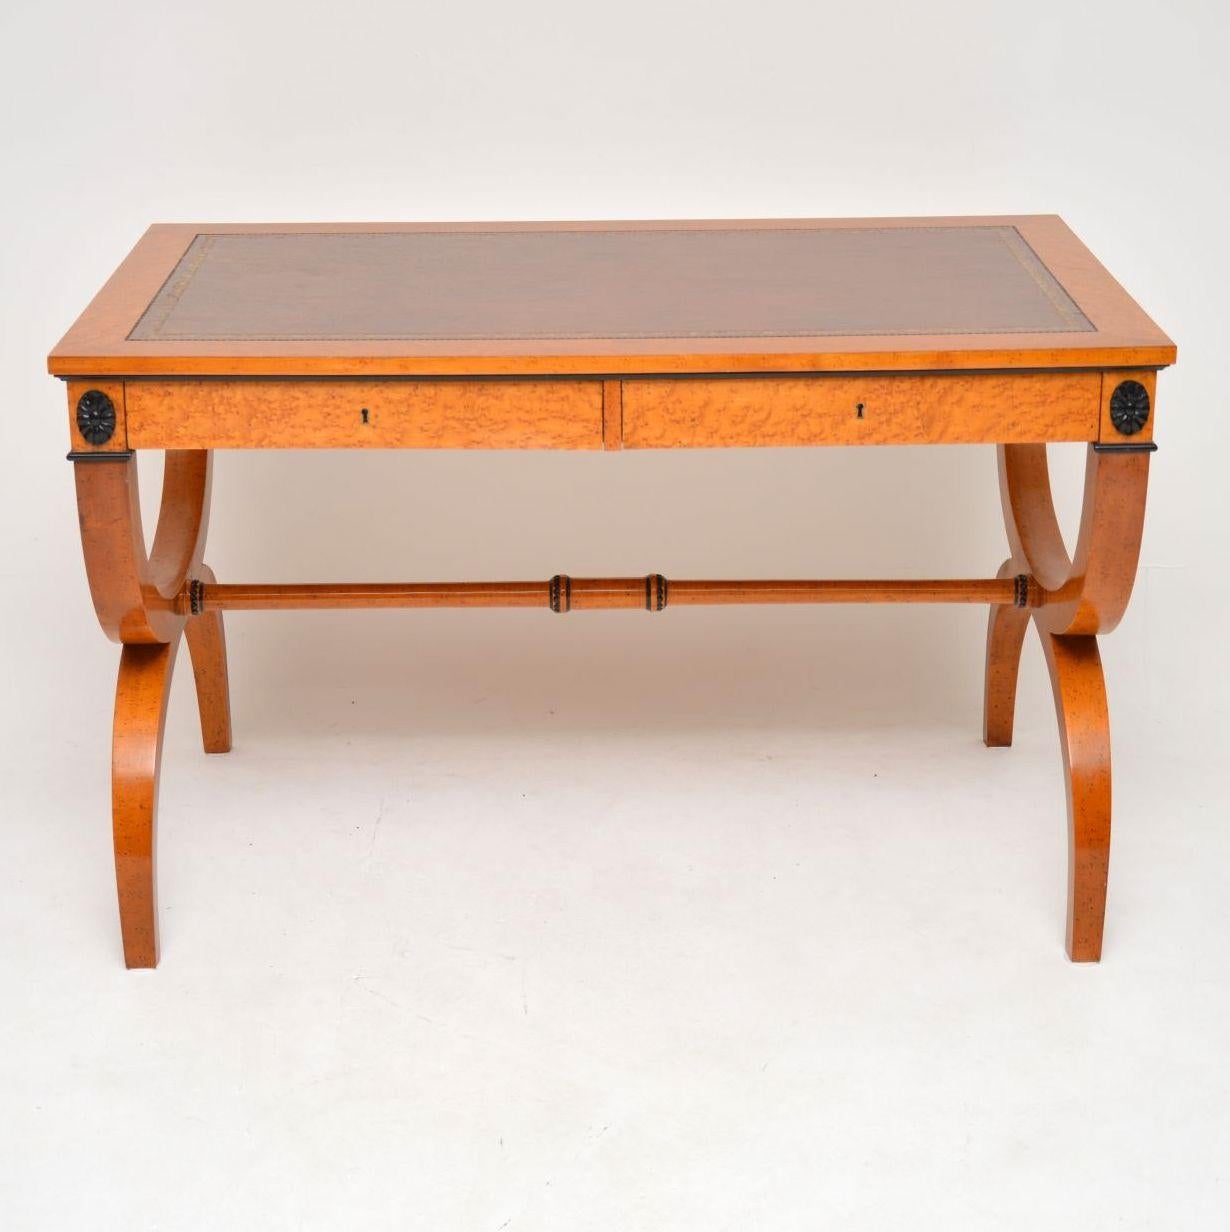 Very stylish antique Regency style writing table in perfect condition and dating from circa 1950s-1960s period. It’s bird's-eye maple with some ebony trimmings and is polished on both sides. The tooled leather writing surface is top quality hide.